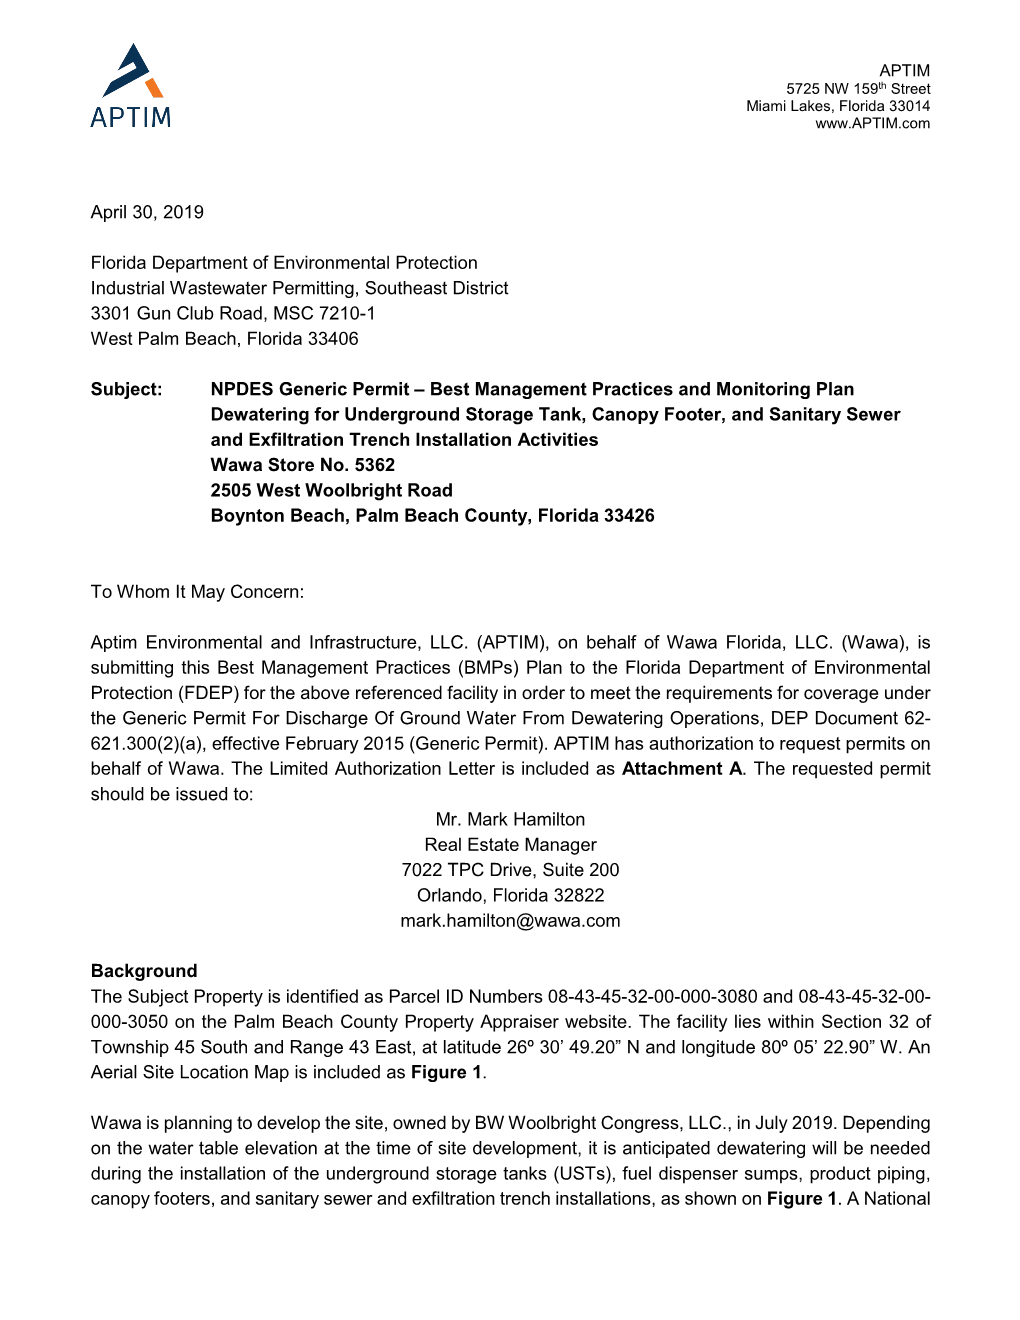 Florida Department of Environmental Protection Industrial Wastewater Permitting, Southeast District 3301 Gun Club Road, MSC 7210-1 West Palm Beach, Florida 33406